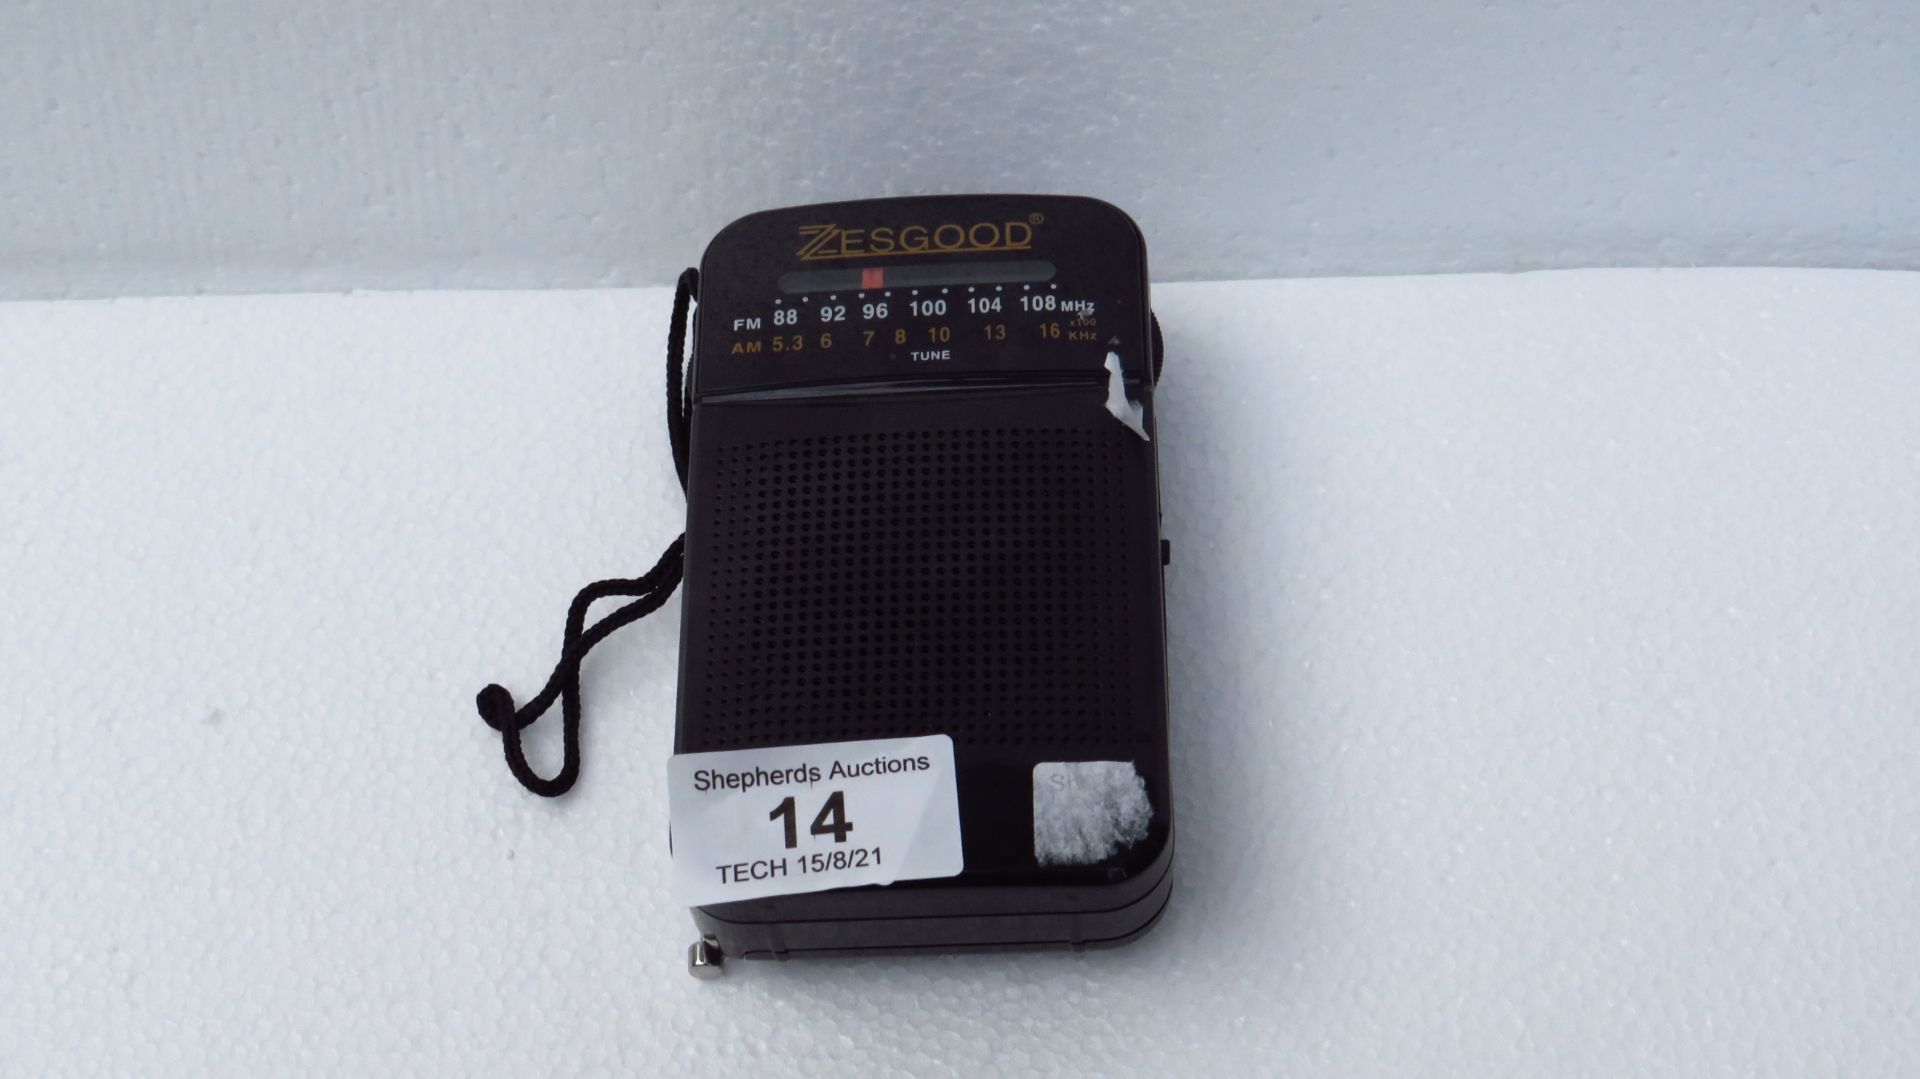 Zesgood Pocket AM/FM Radio - Tested Working & Boxed - RRP £12